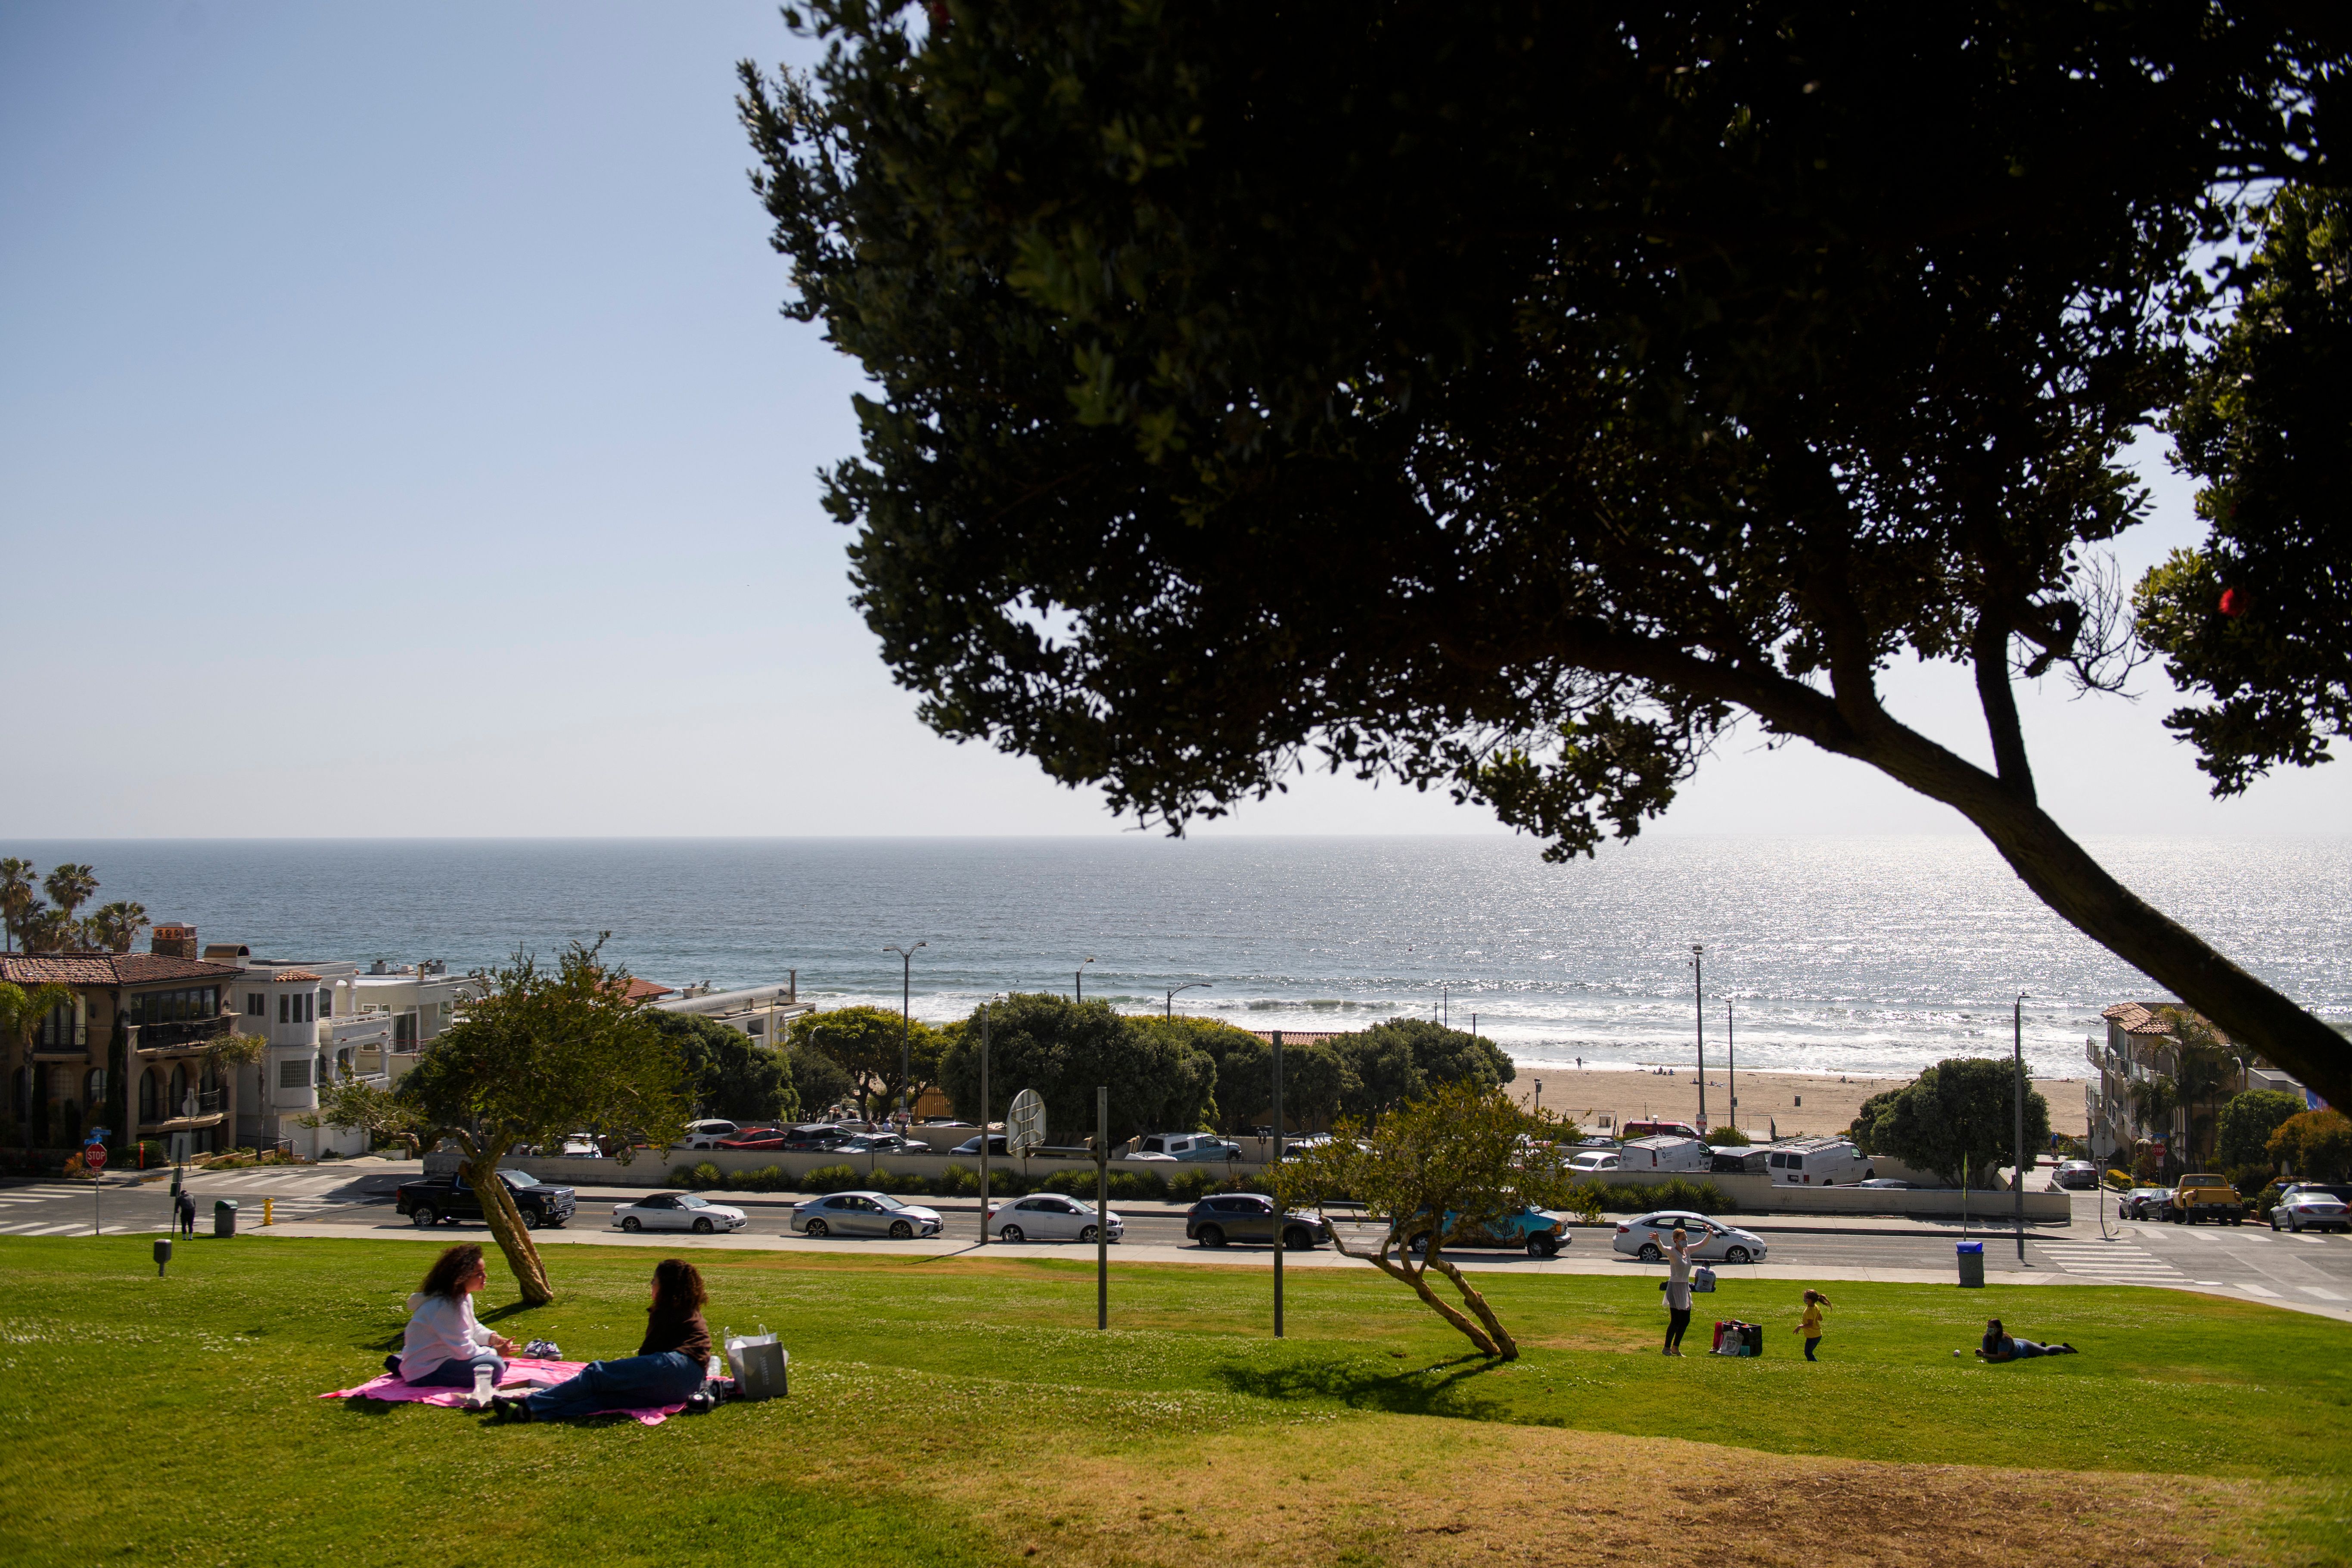 People relax at Bruce's Beach park, above a Los Angeles County Fire Department Lifeguard station on April 20, 2021 in Manhattan Beach, California